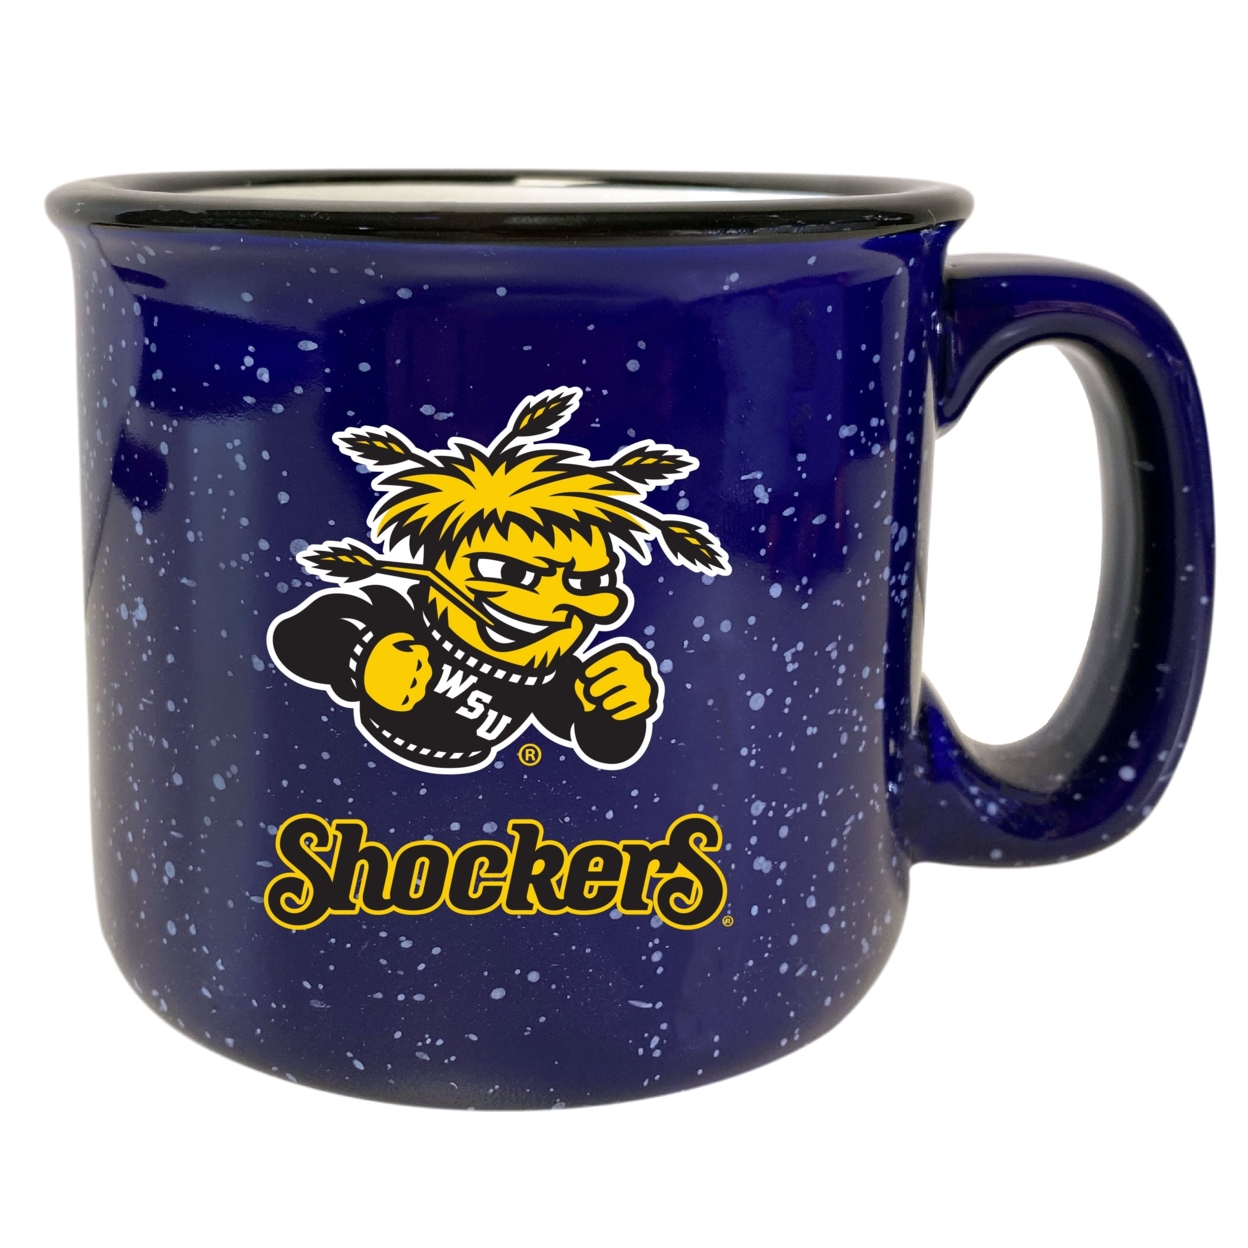 Wichita State Shockers Speckled Ceramic Camper Coffee Mug - Choose Your Color - Gray